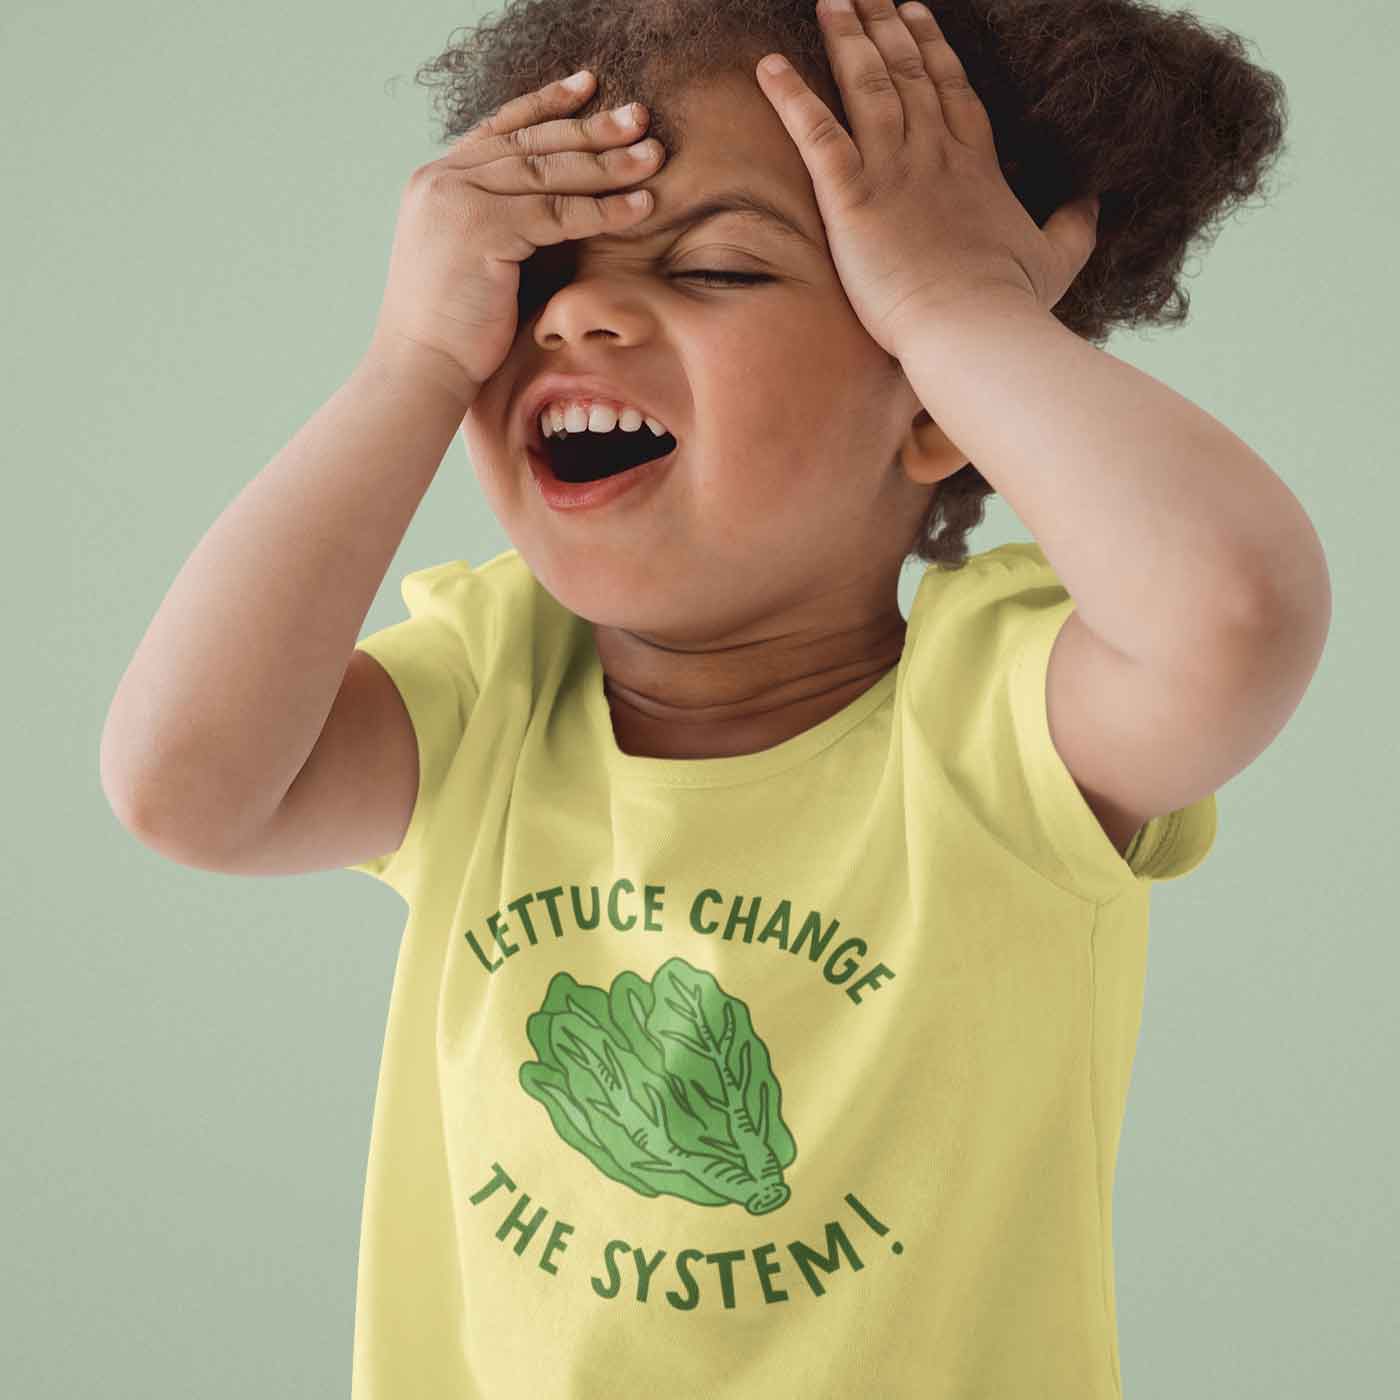 Kid wearing Lettuce Change the System toddler tee